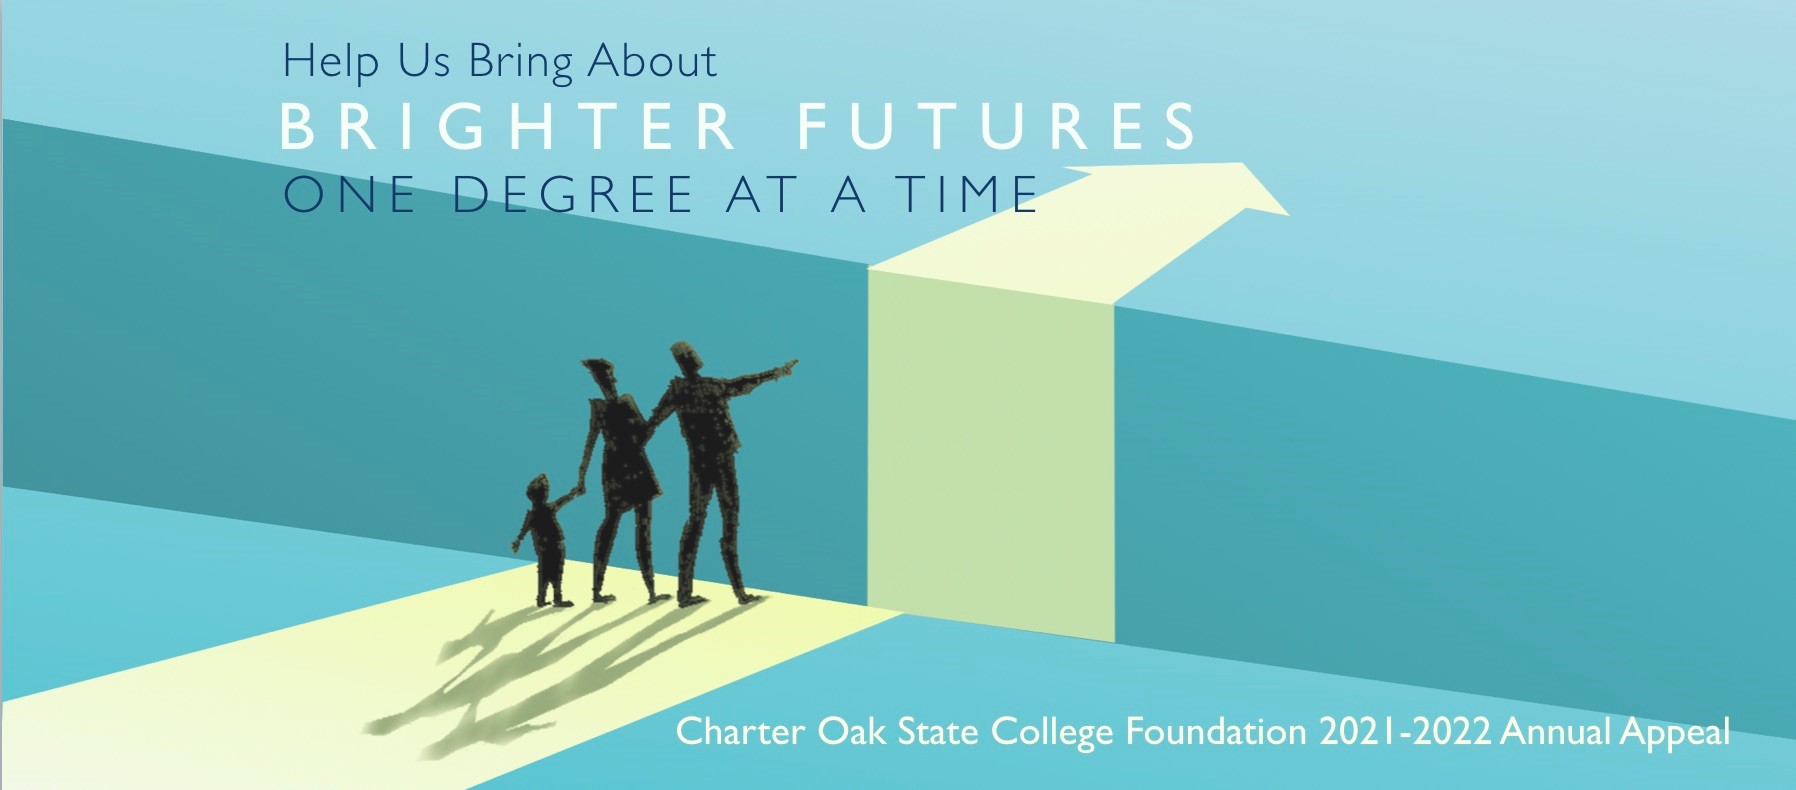 Brighter Futures One Degree One Gift at a Time